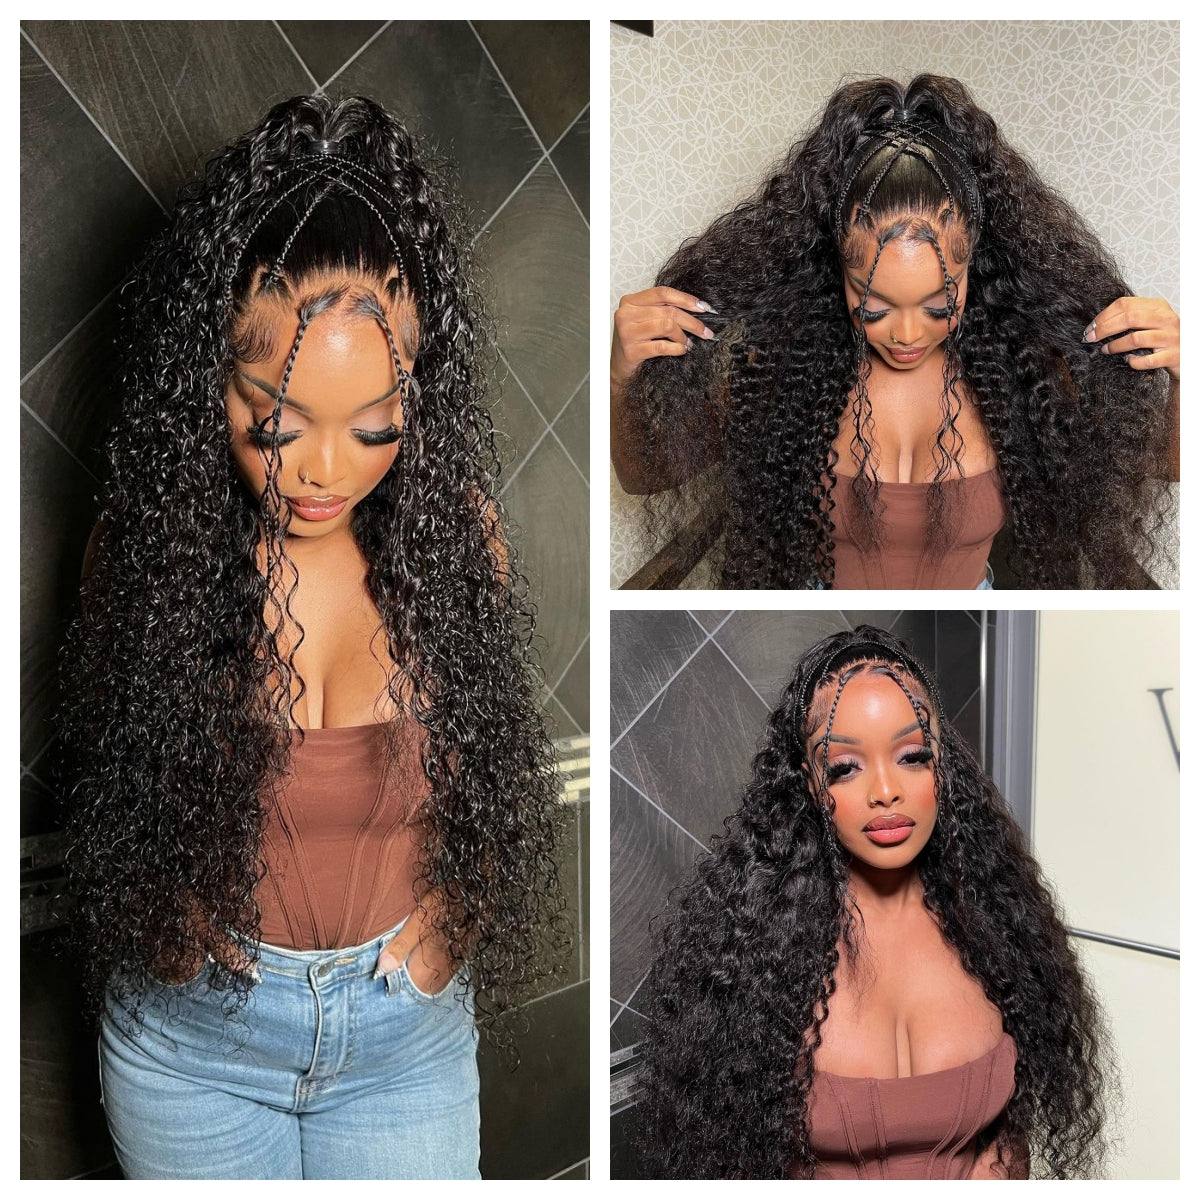 Crystal HD Lace 13x6 Pre-pluck Lace Front Human Hair Wigs Curly Wigs